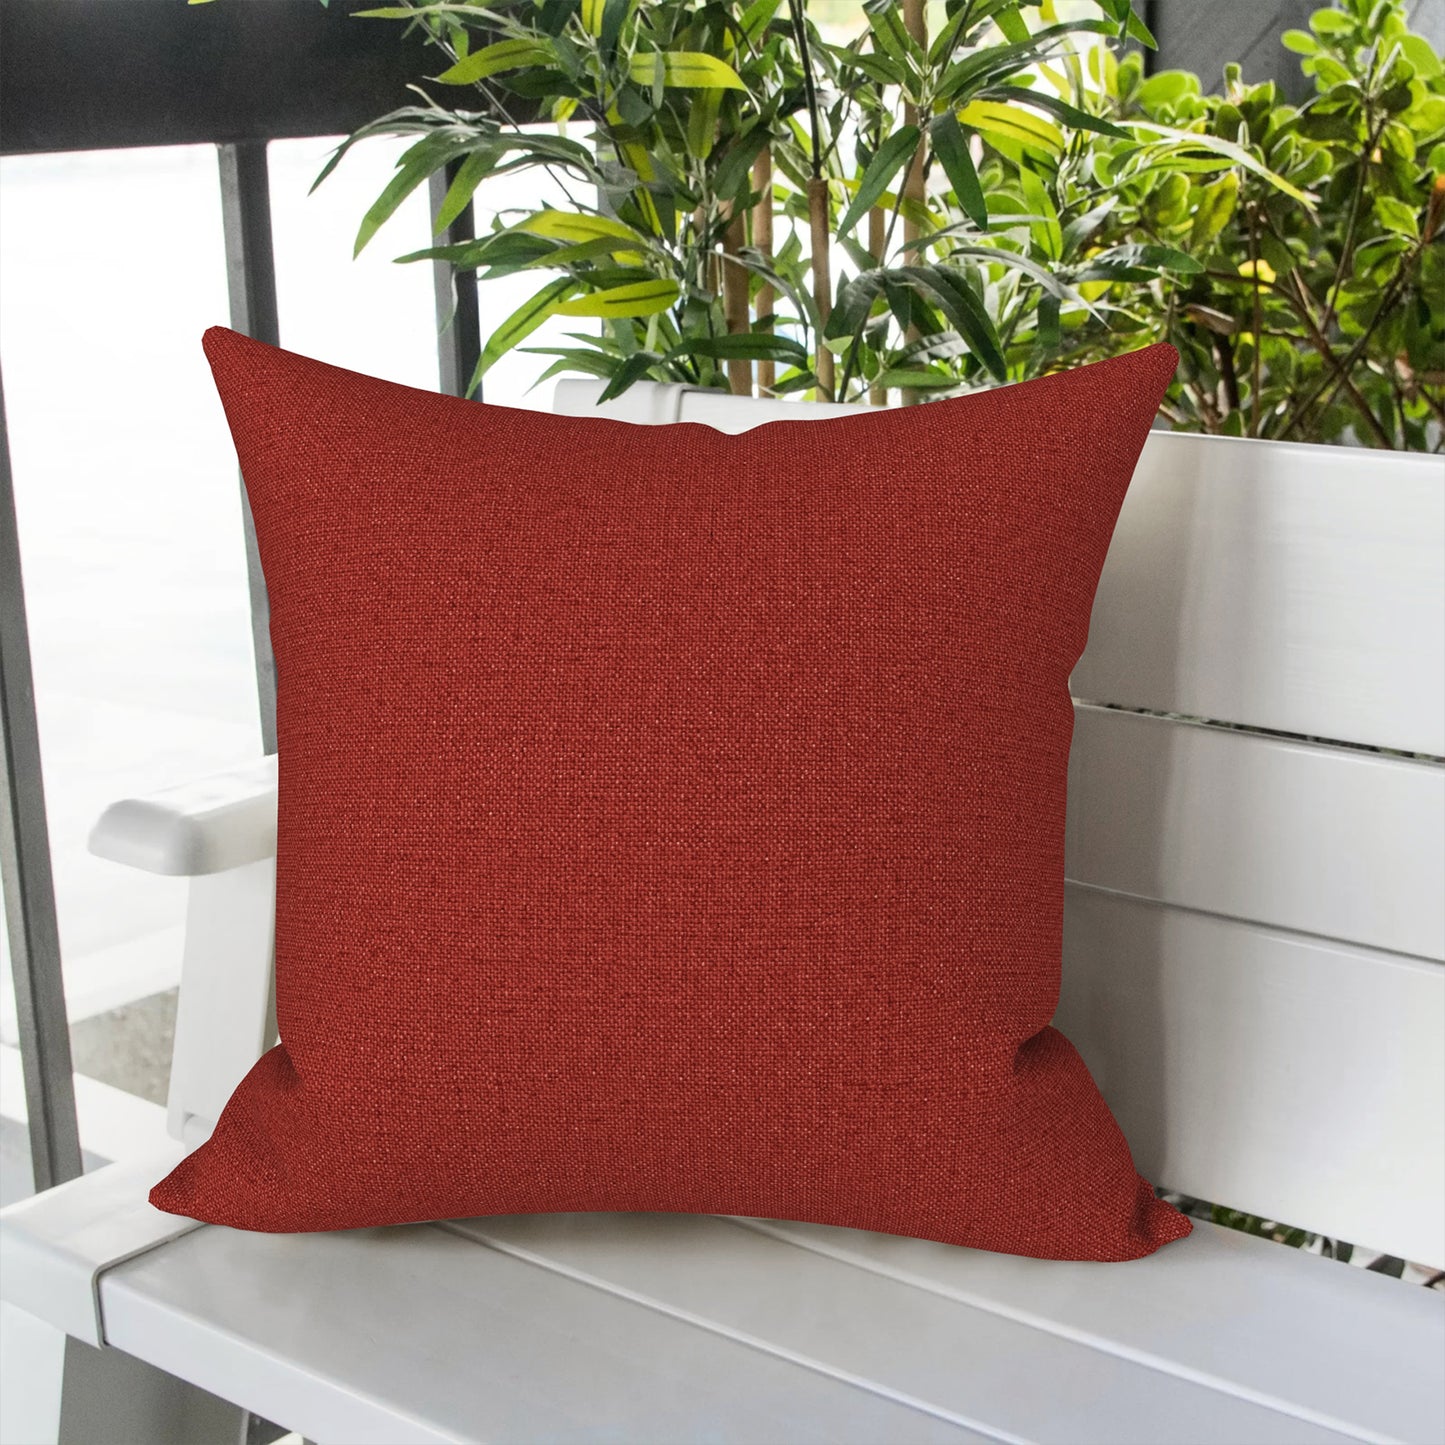 Melody Elephant Patio Throw Pillows with Inners, Fade Resistant Square Pillow Pack of 2, Decorative Garden Cushions for Home, 18x18 Inch, Brick Red